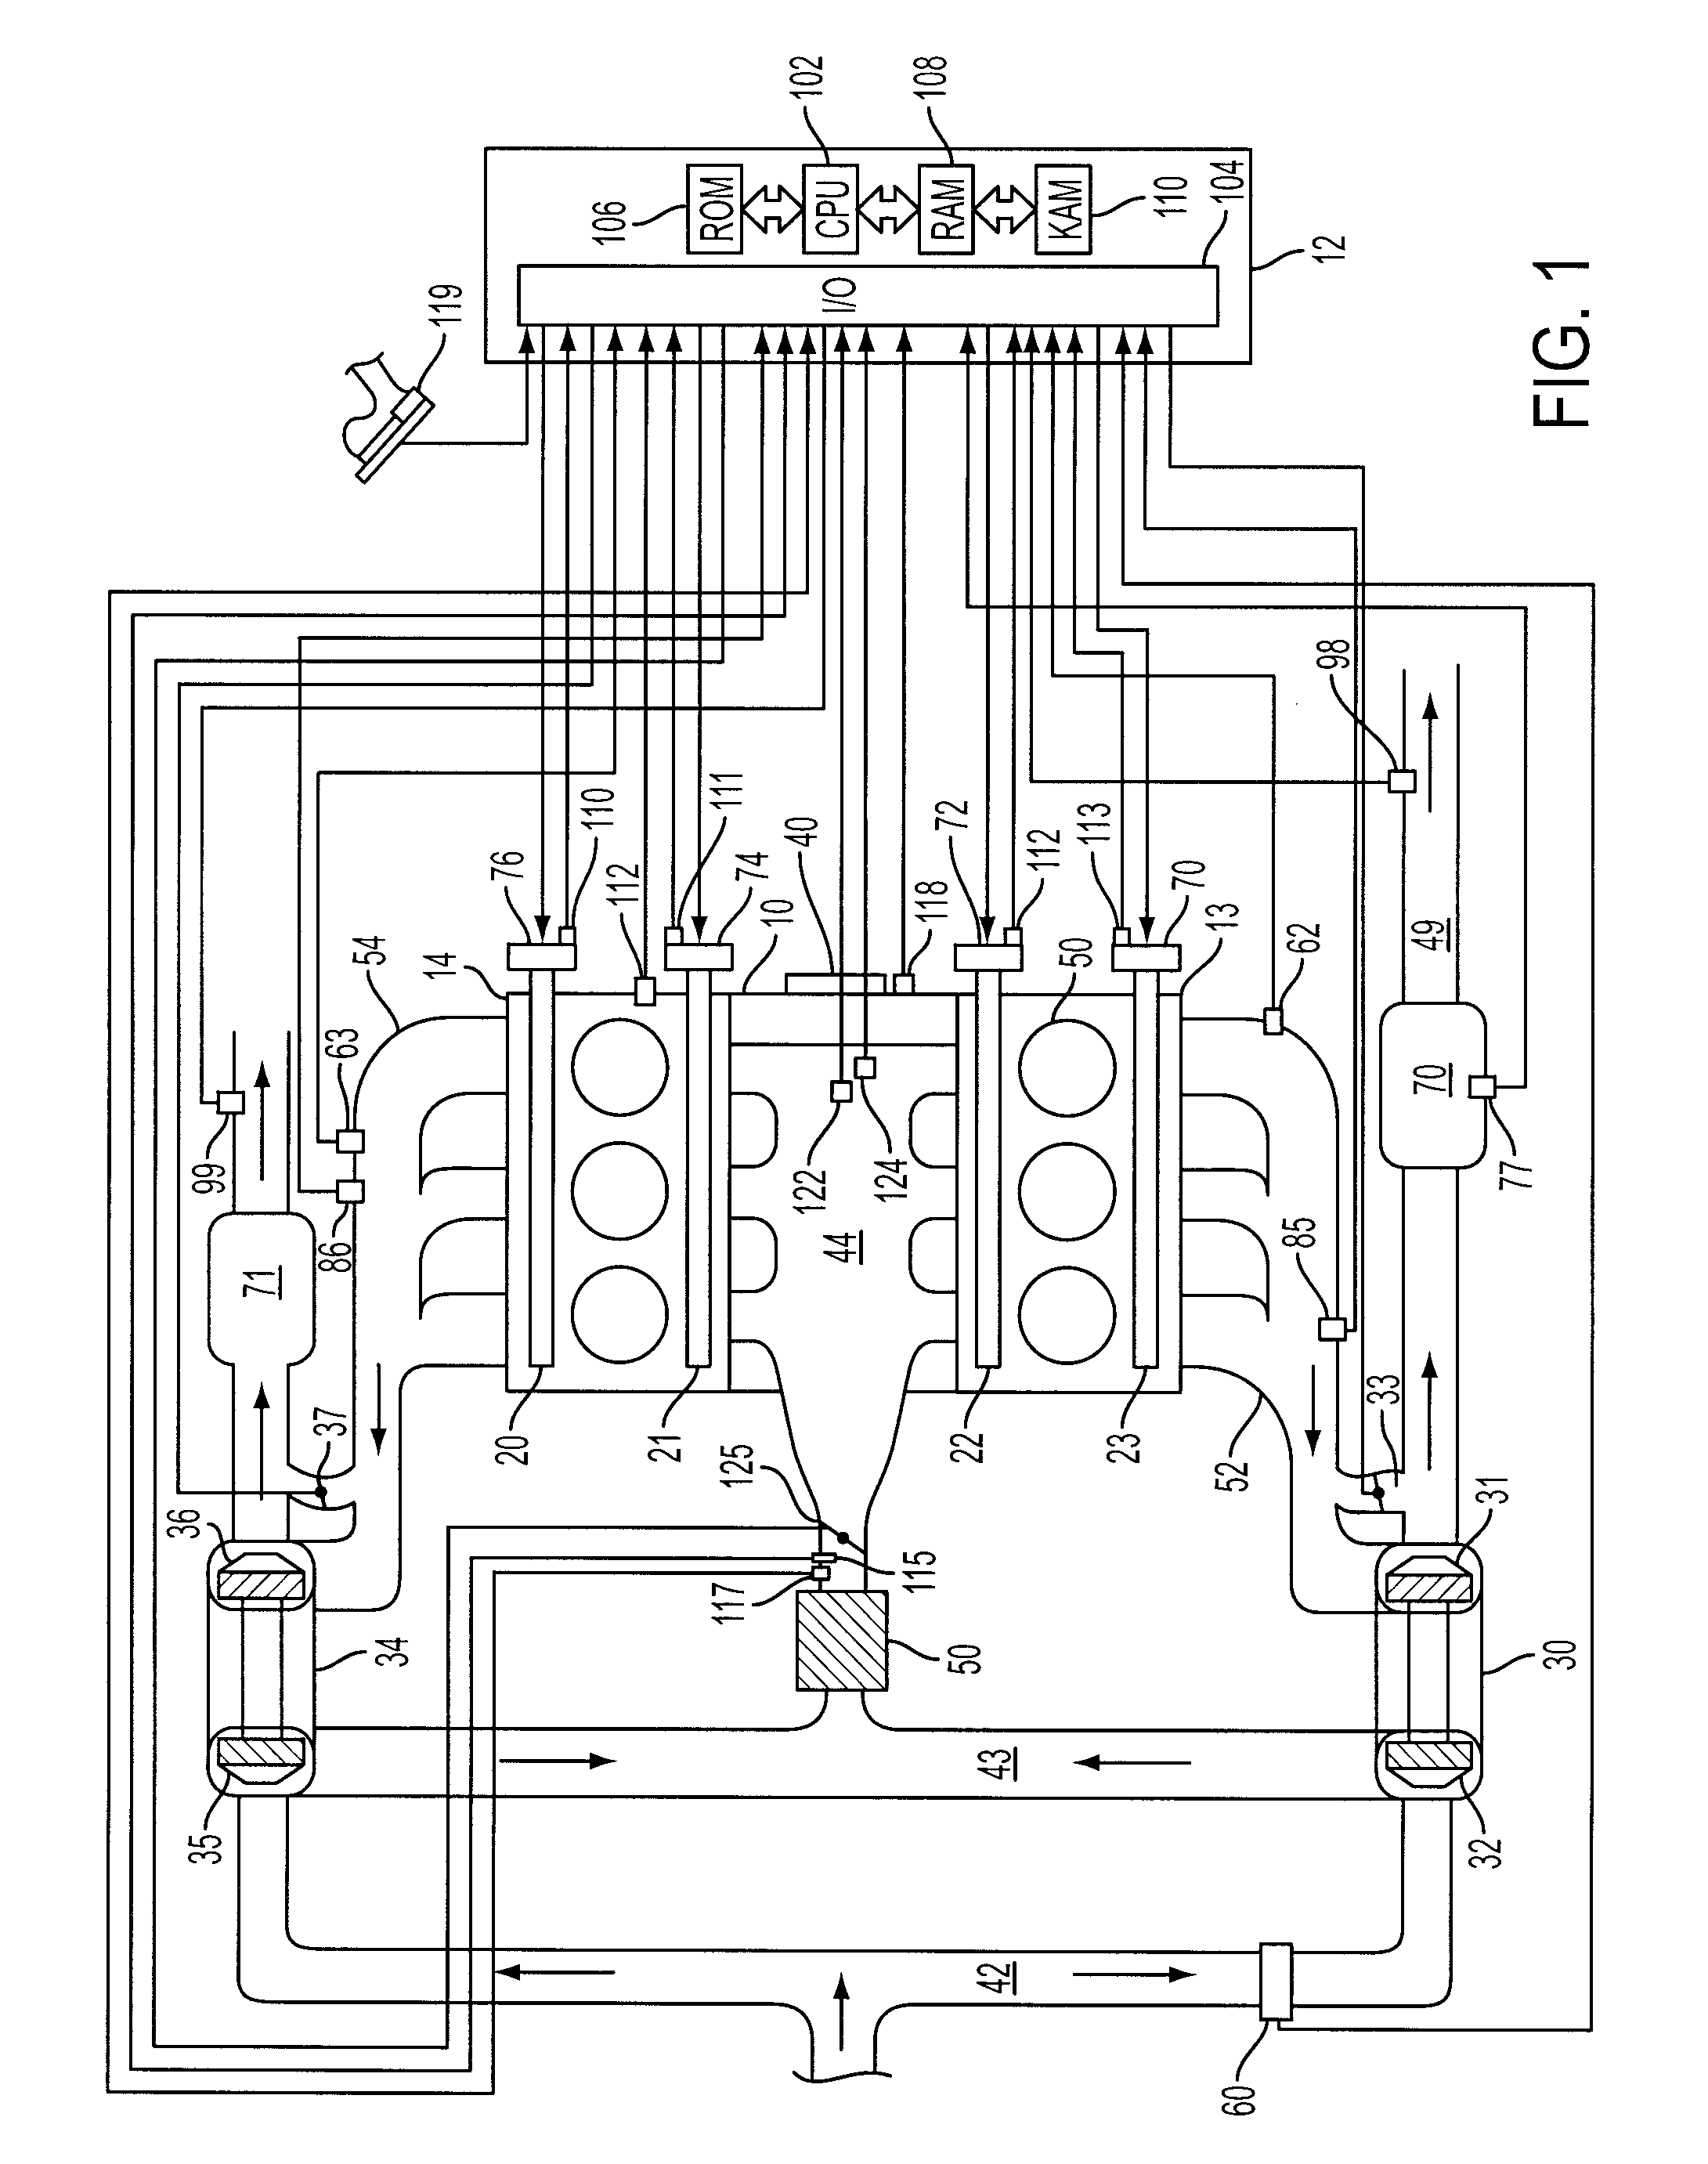 Controlling cylinder mixture and turbocharger operation